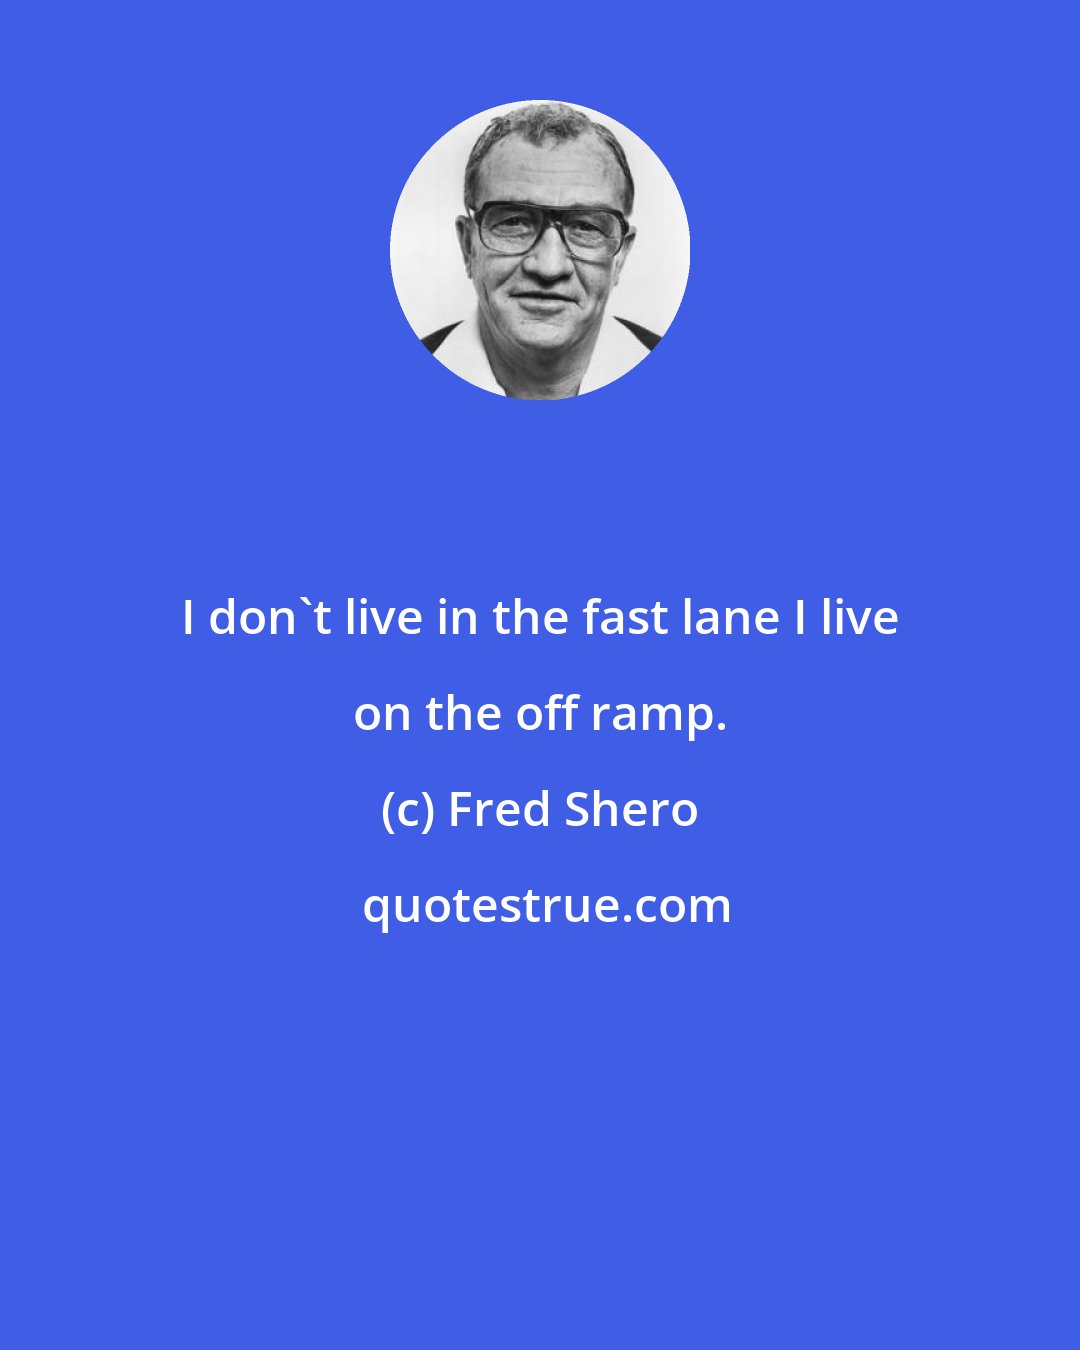 Fred Shero: I don't live in the fast lane I live on the off ramp.